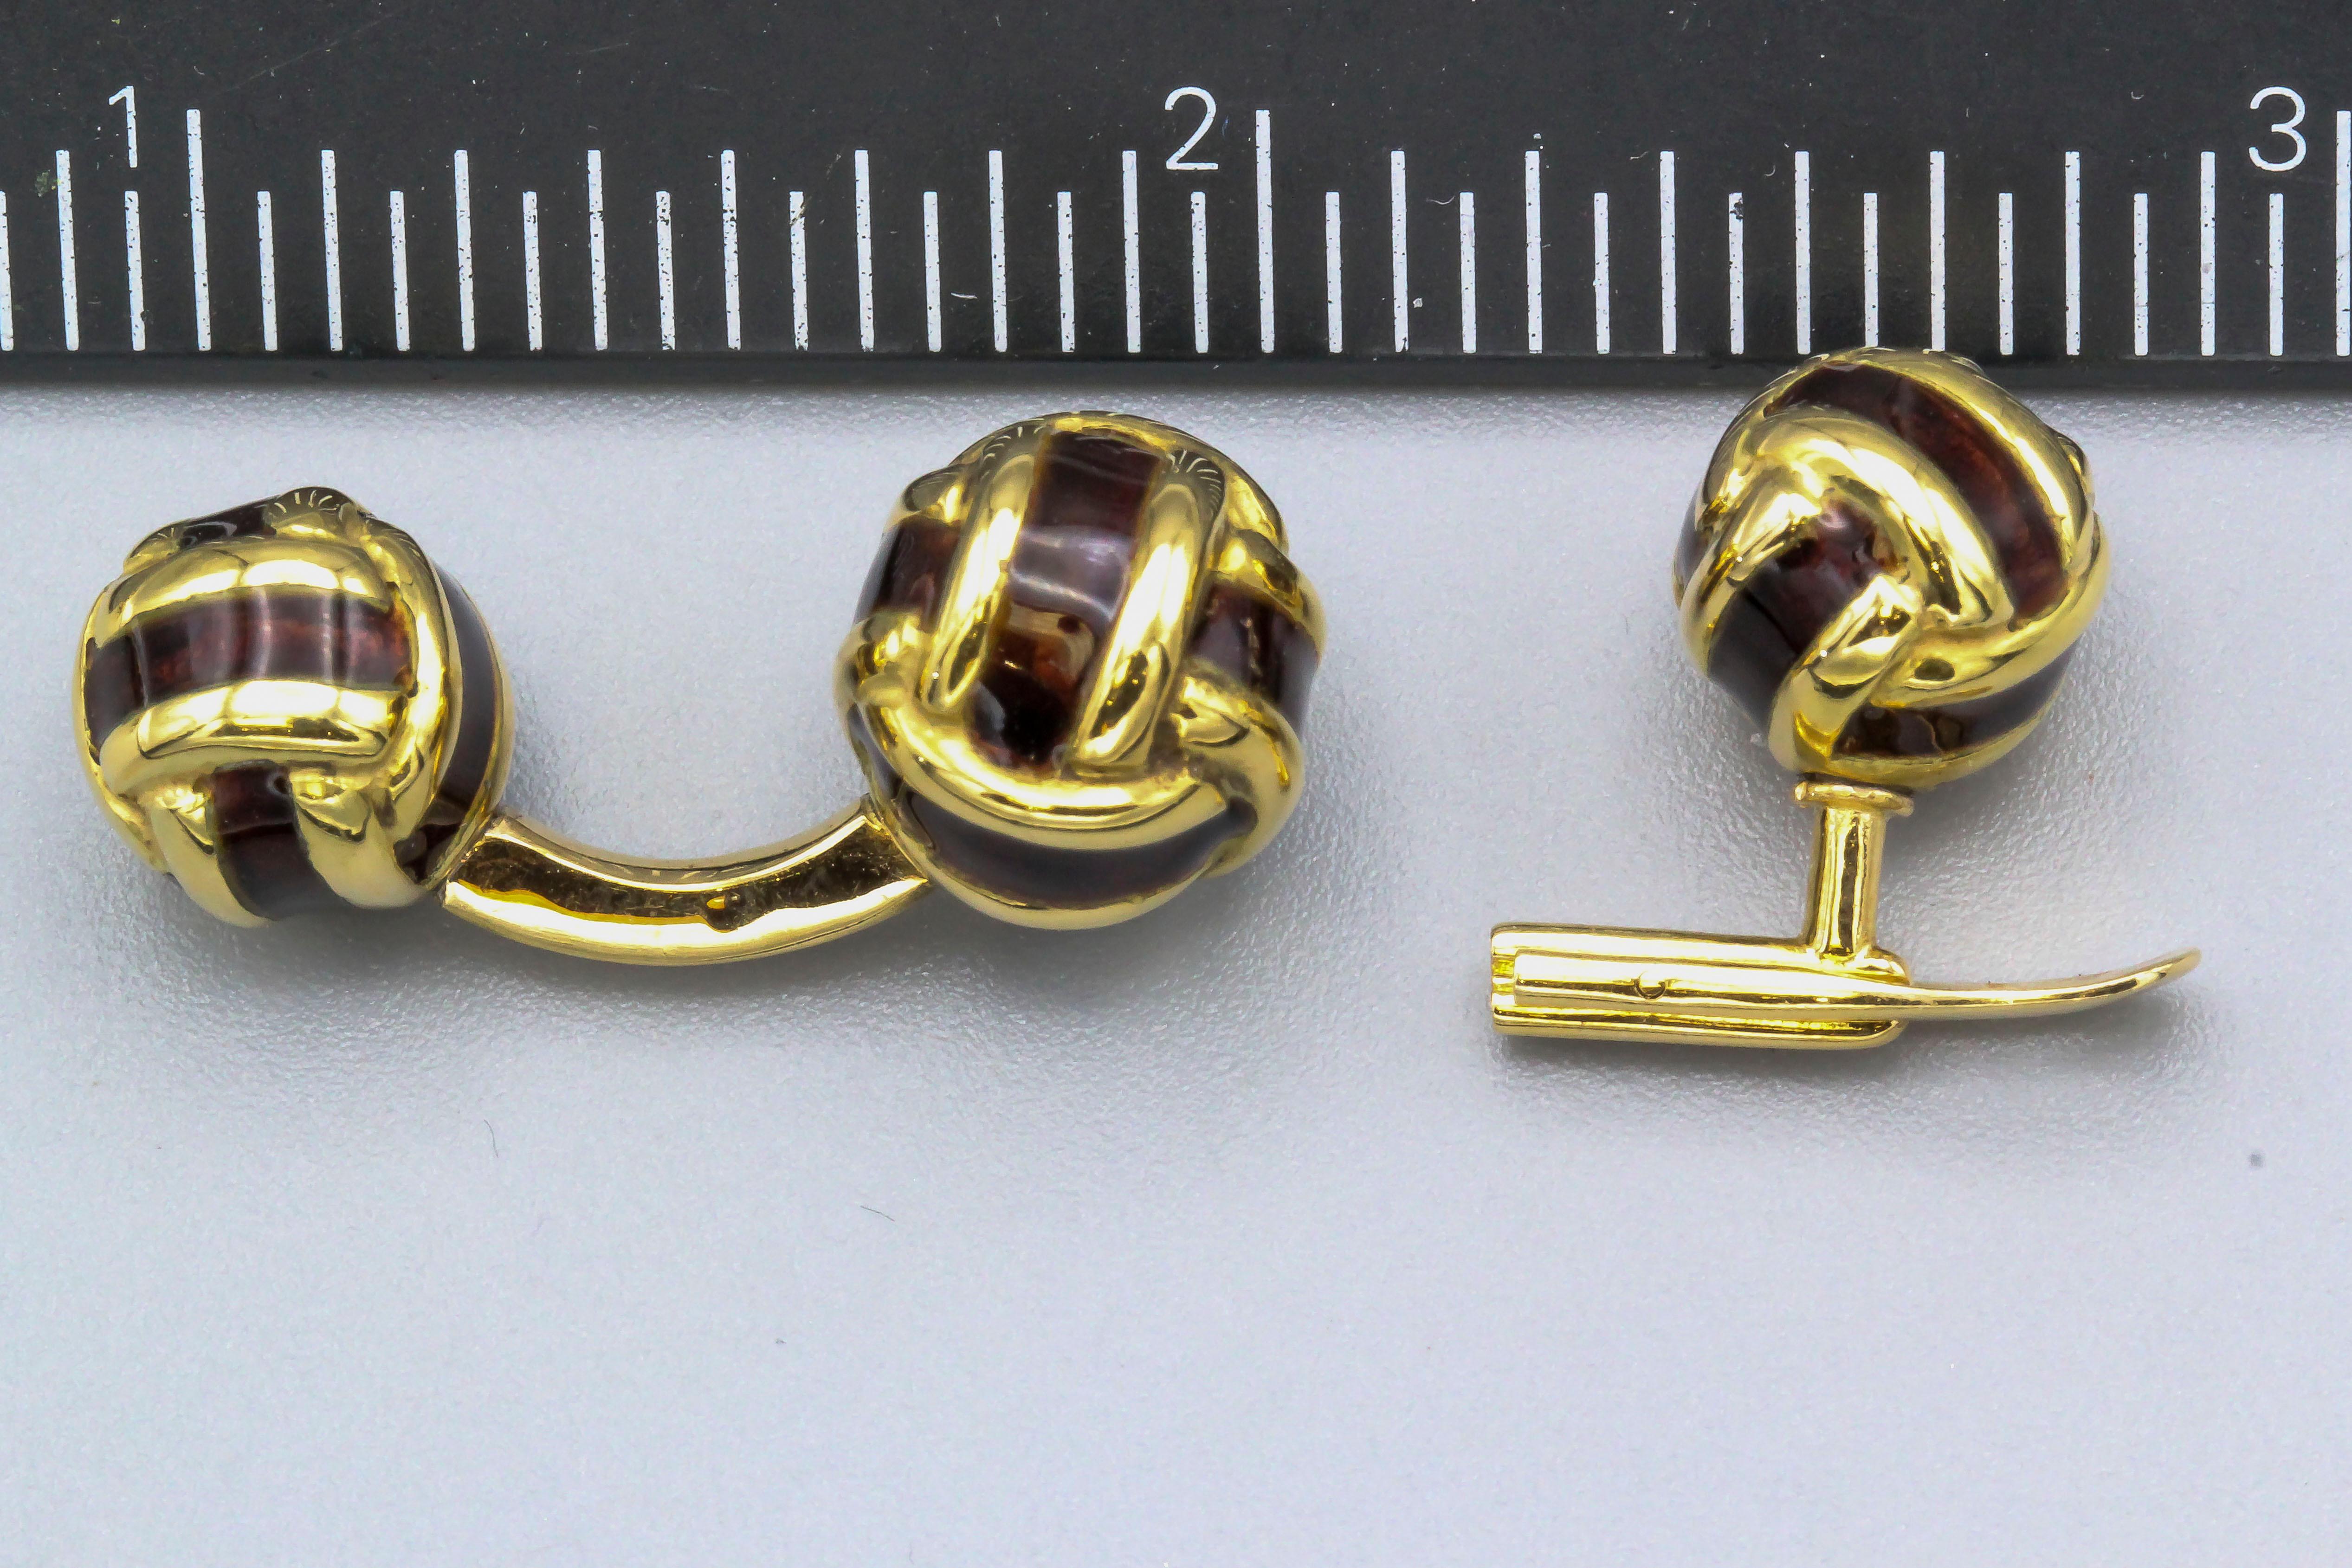 Contemporary French 18 Karat Gold and Enamel Knot Cufflink Stud Set